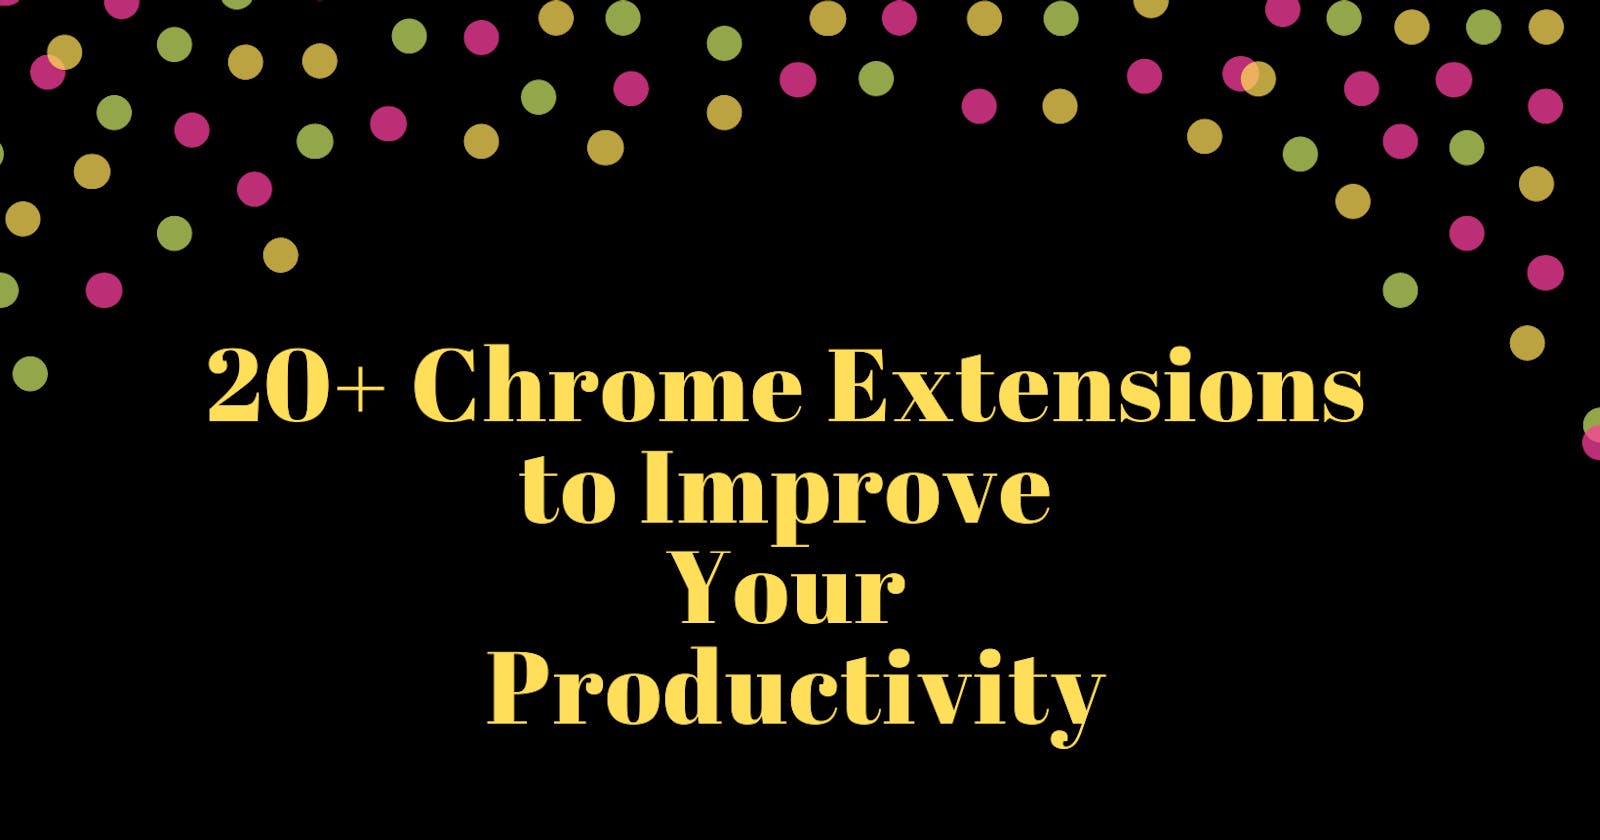 20+ Chrome Extensions to Improve Your Productivity